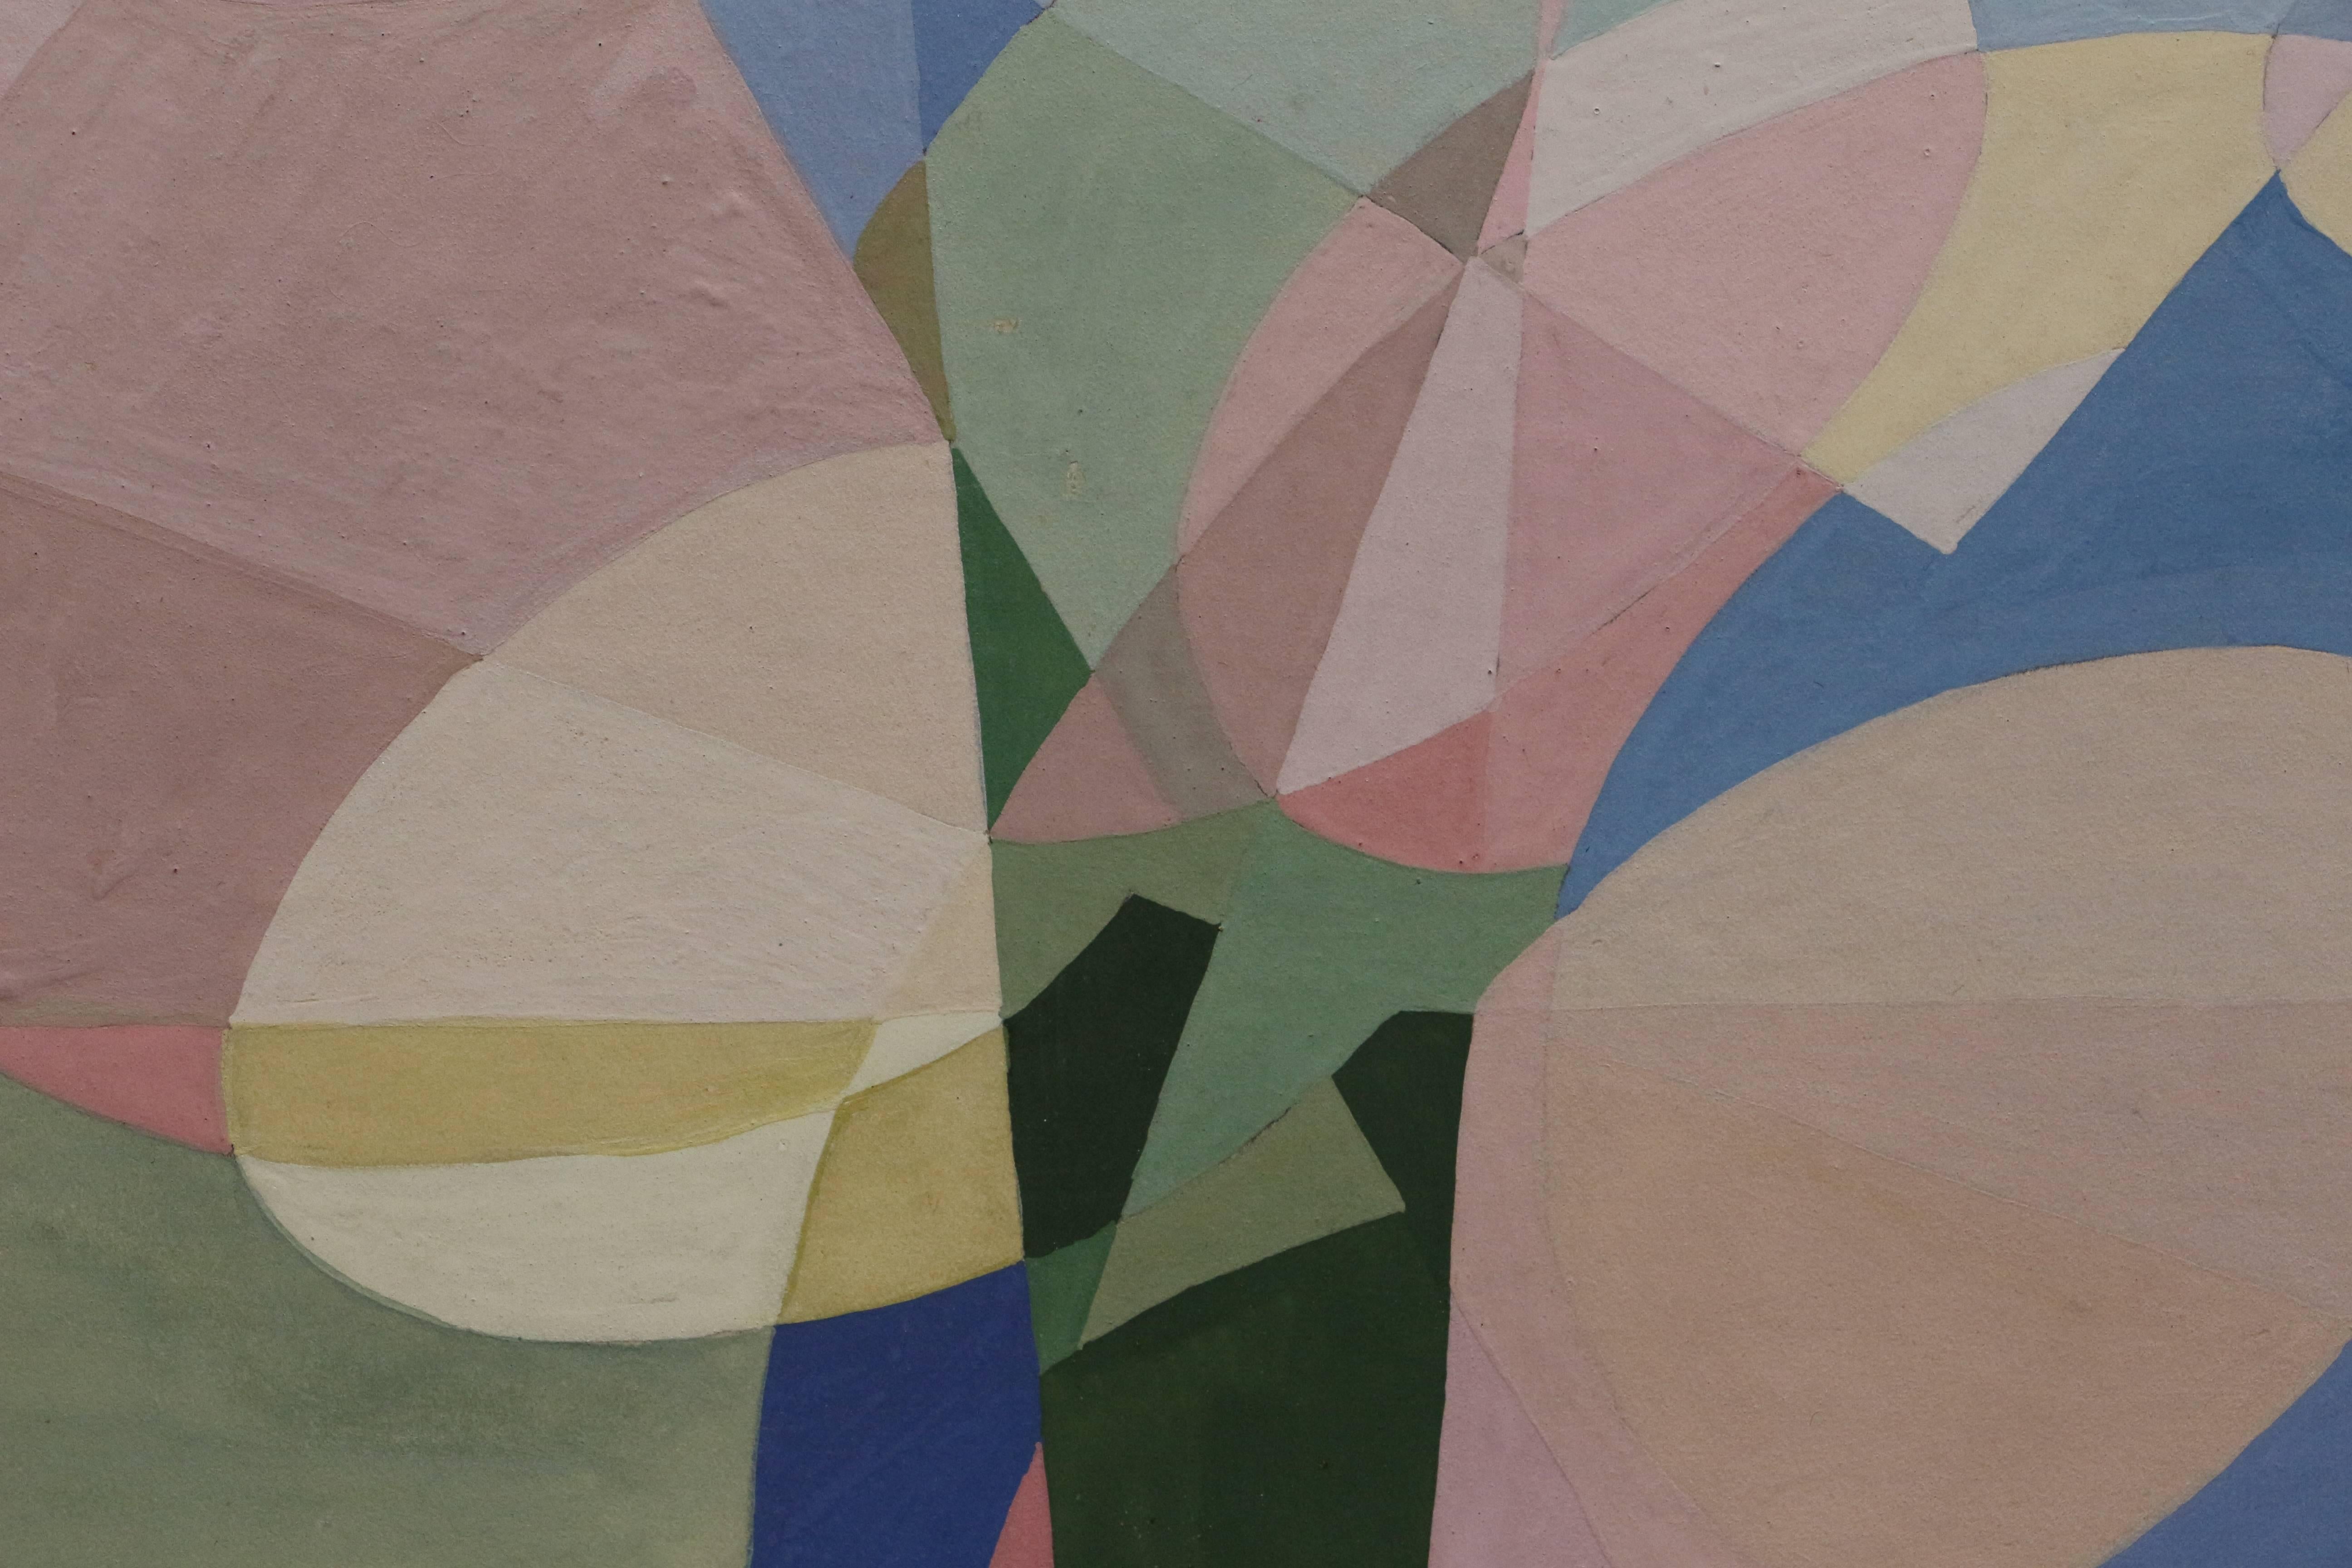 This abstract geometric painting depicts various shapes in a pastel and colorful composition with a central triangle angled downward. 

Argentinian painter Anita Payró (1897-1980) was heavily influenced by her artistic family and her educations in